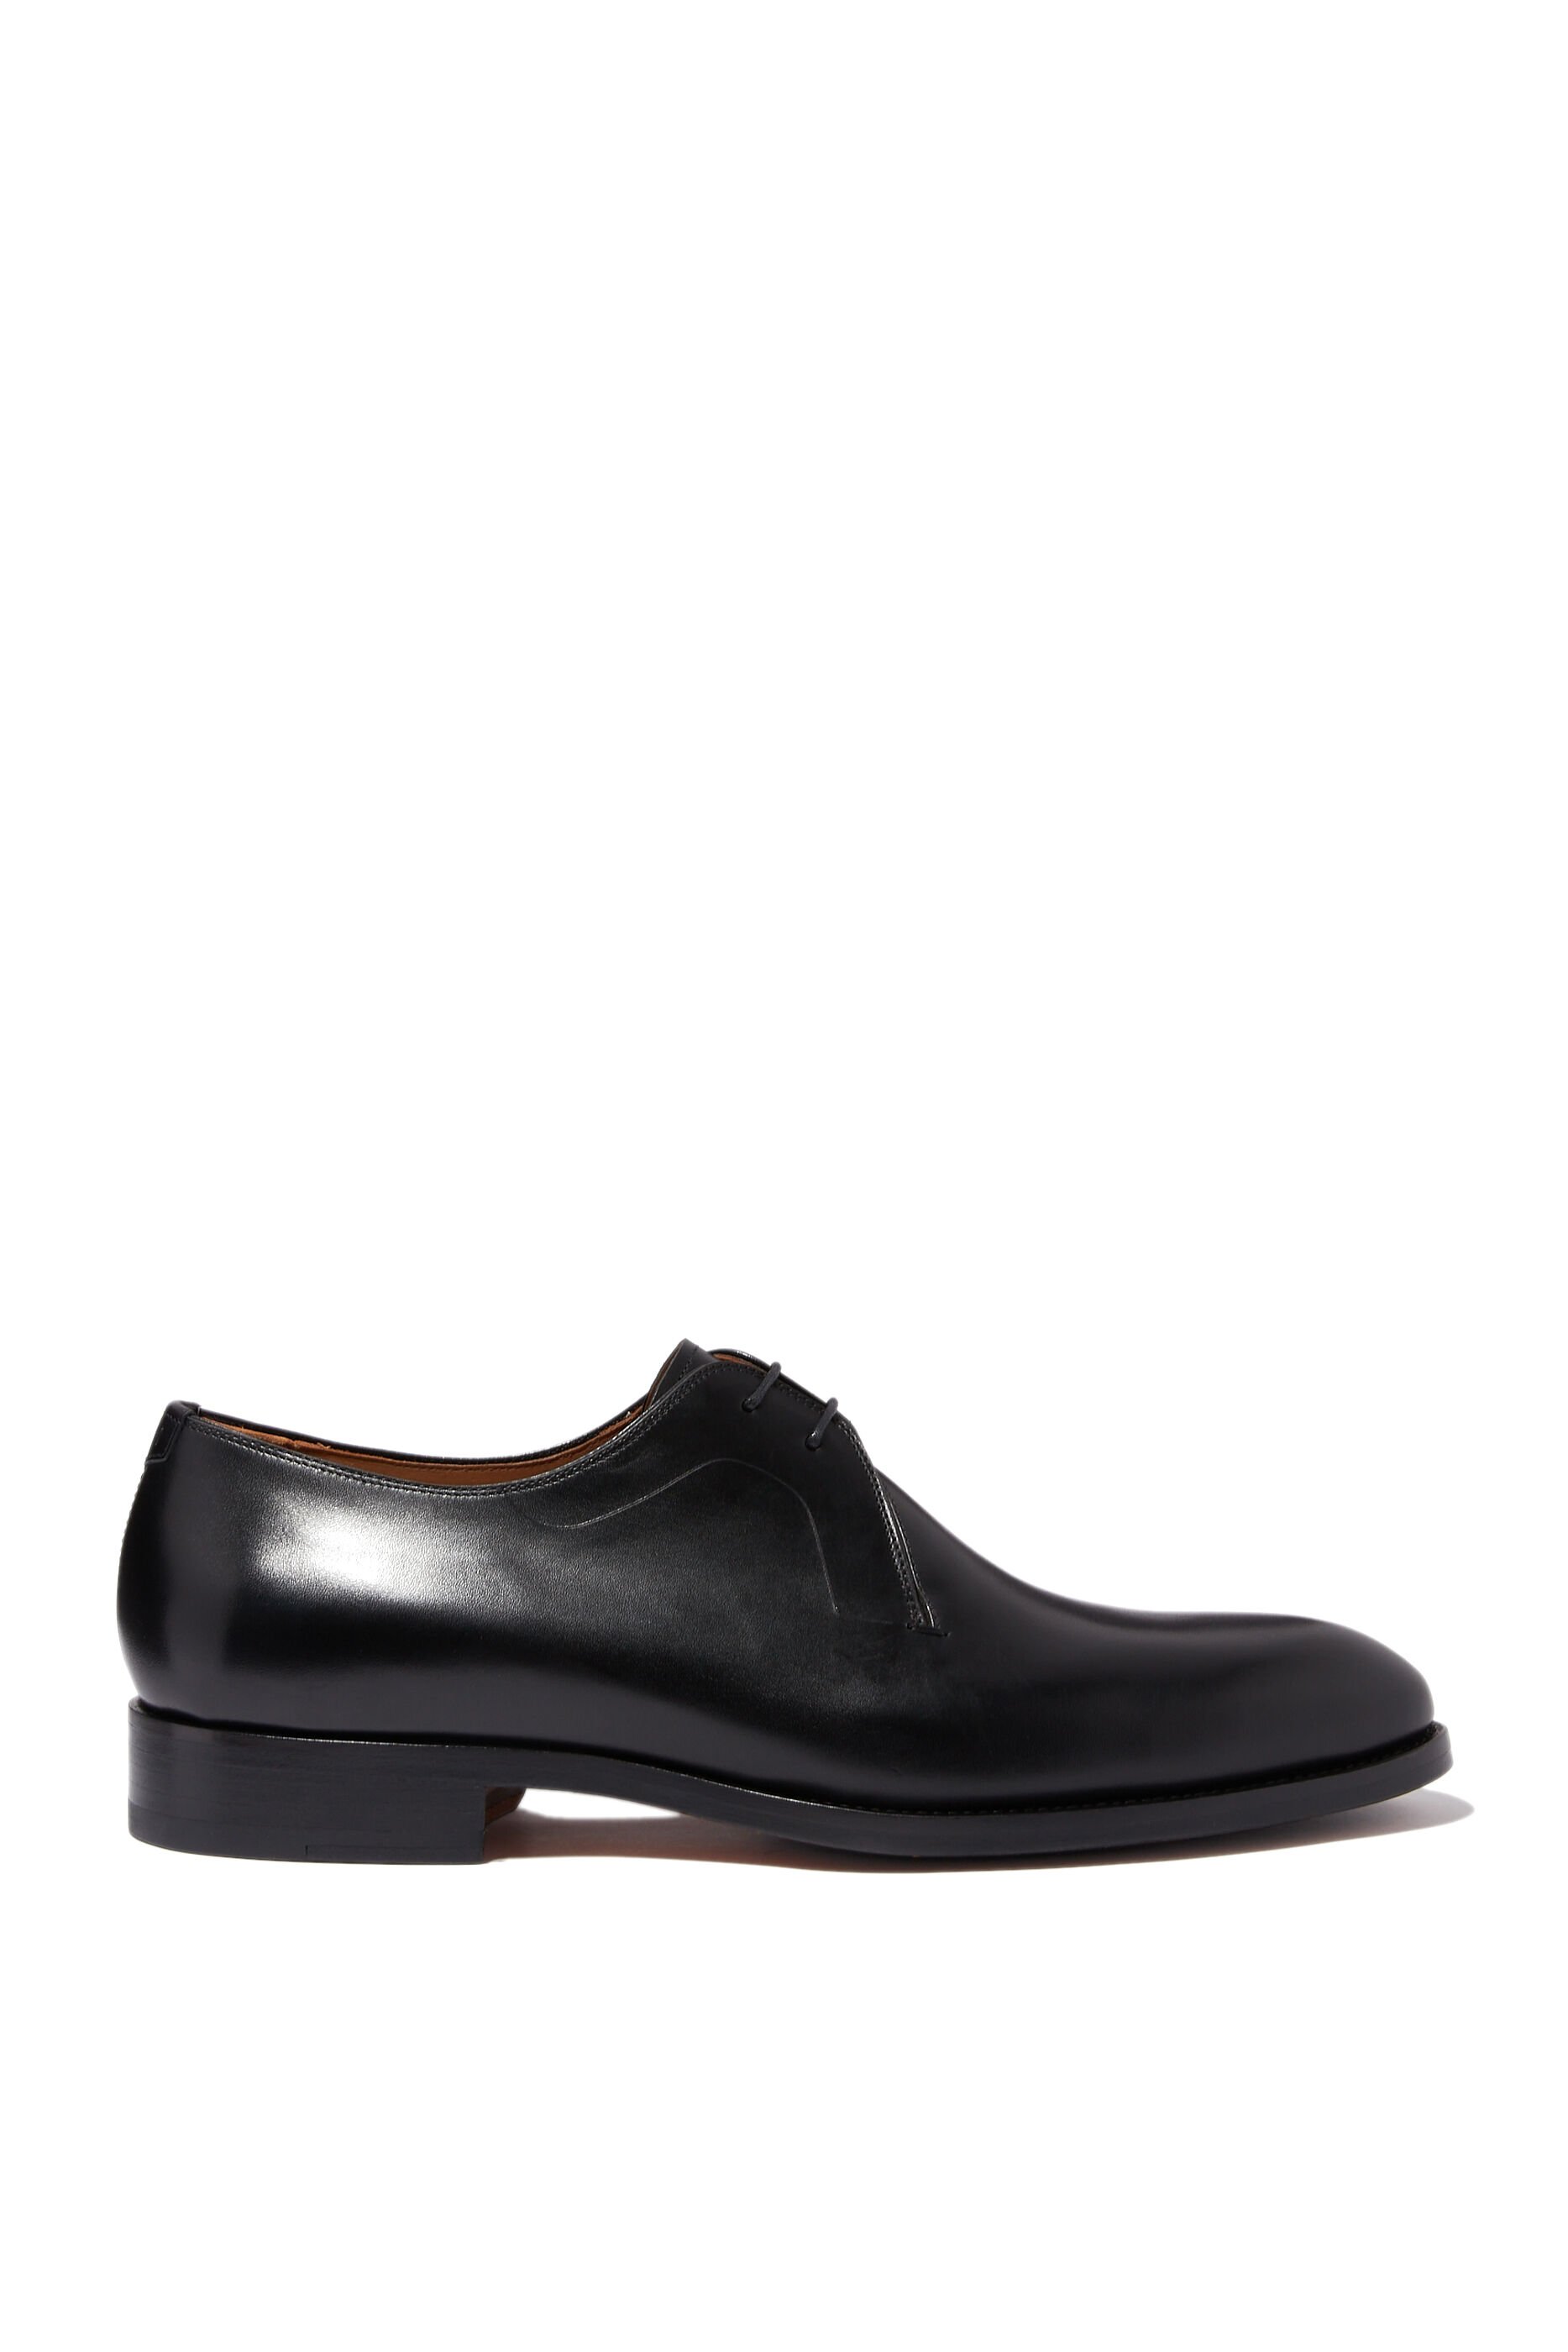 Magnanni Derby Shoes in Leather - Mens 